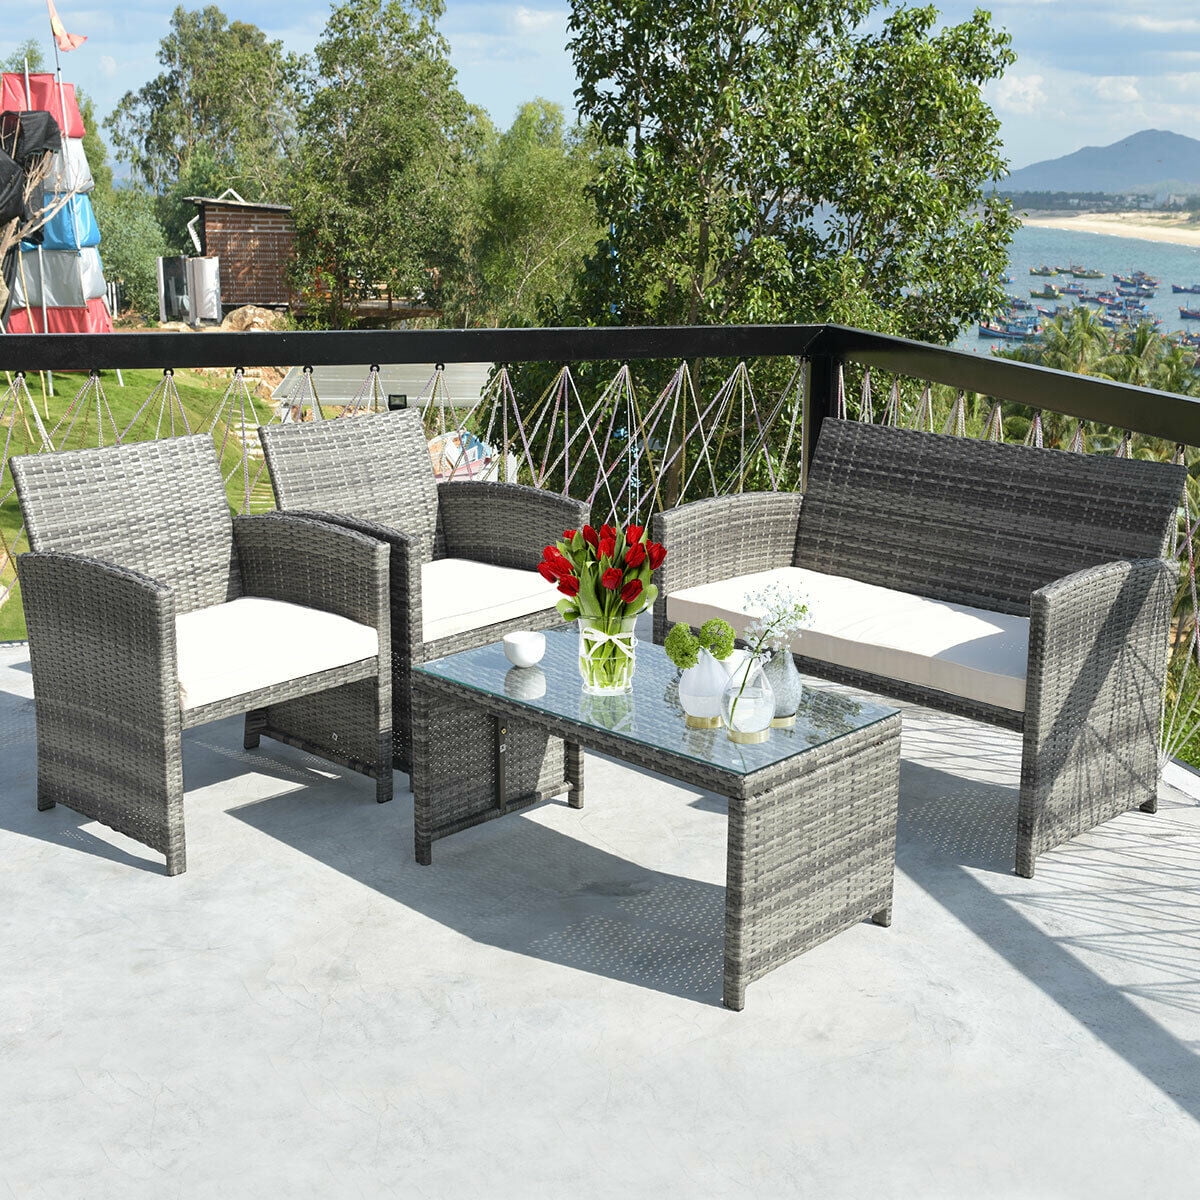 Outsunny 7-Piece Rattan Outdoor Furniture-Set - Creamy White (860-020) for  sale online 